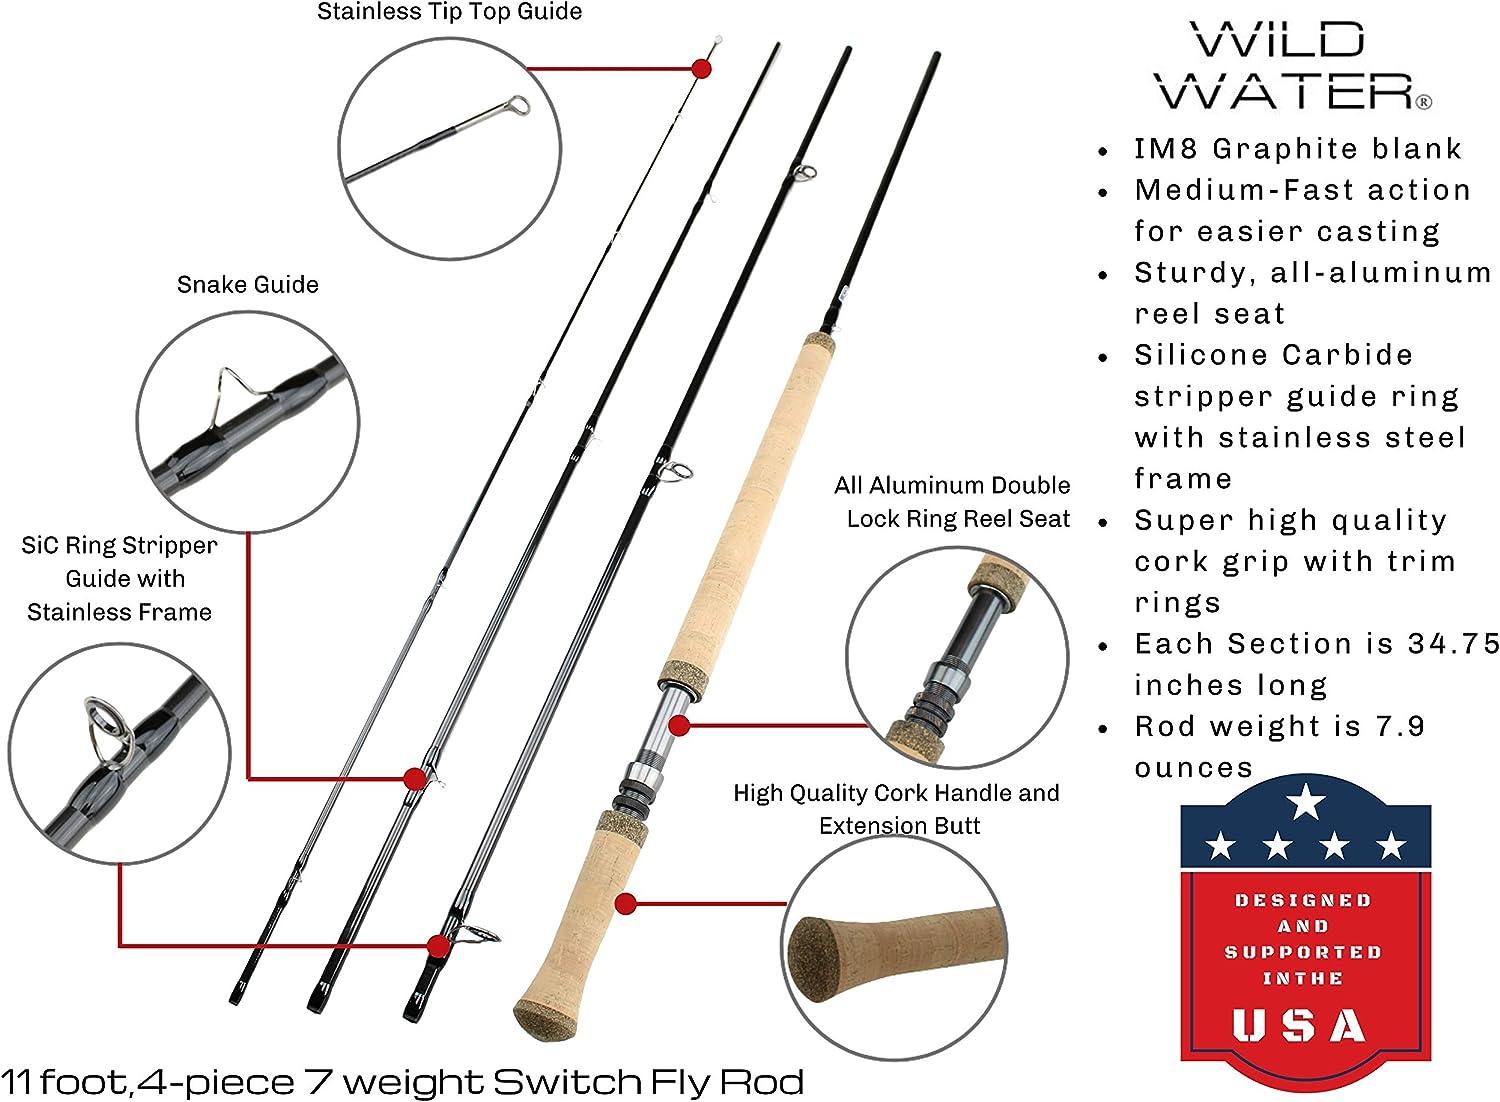 Wild Water Fly Fishing 11 Foot 4-Piece 7-Weight Switch Rod Complete Fly Fishing  Rod and Reel Combo Starter Package for Saltwater